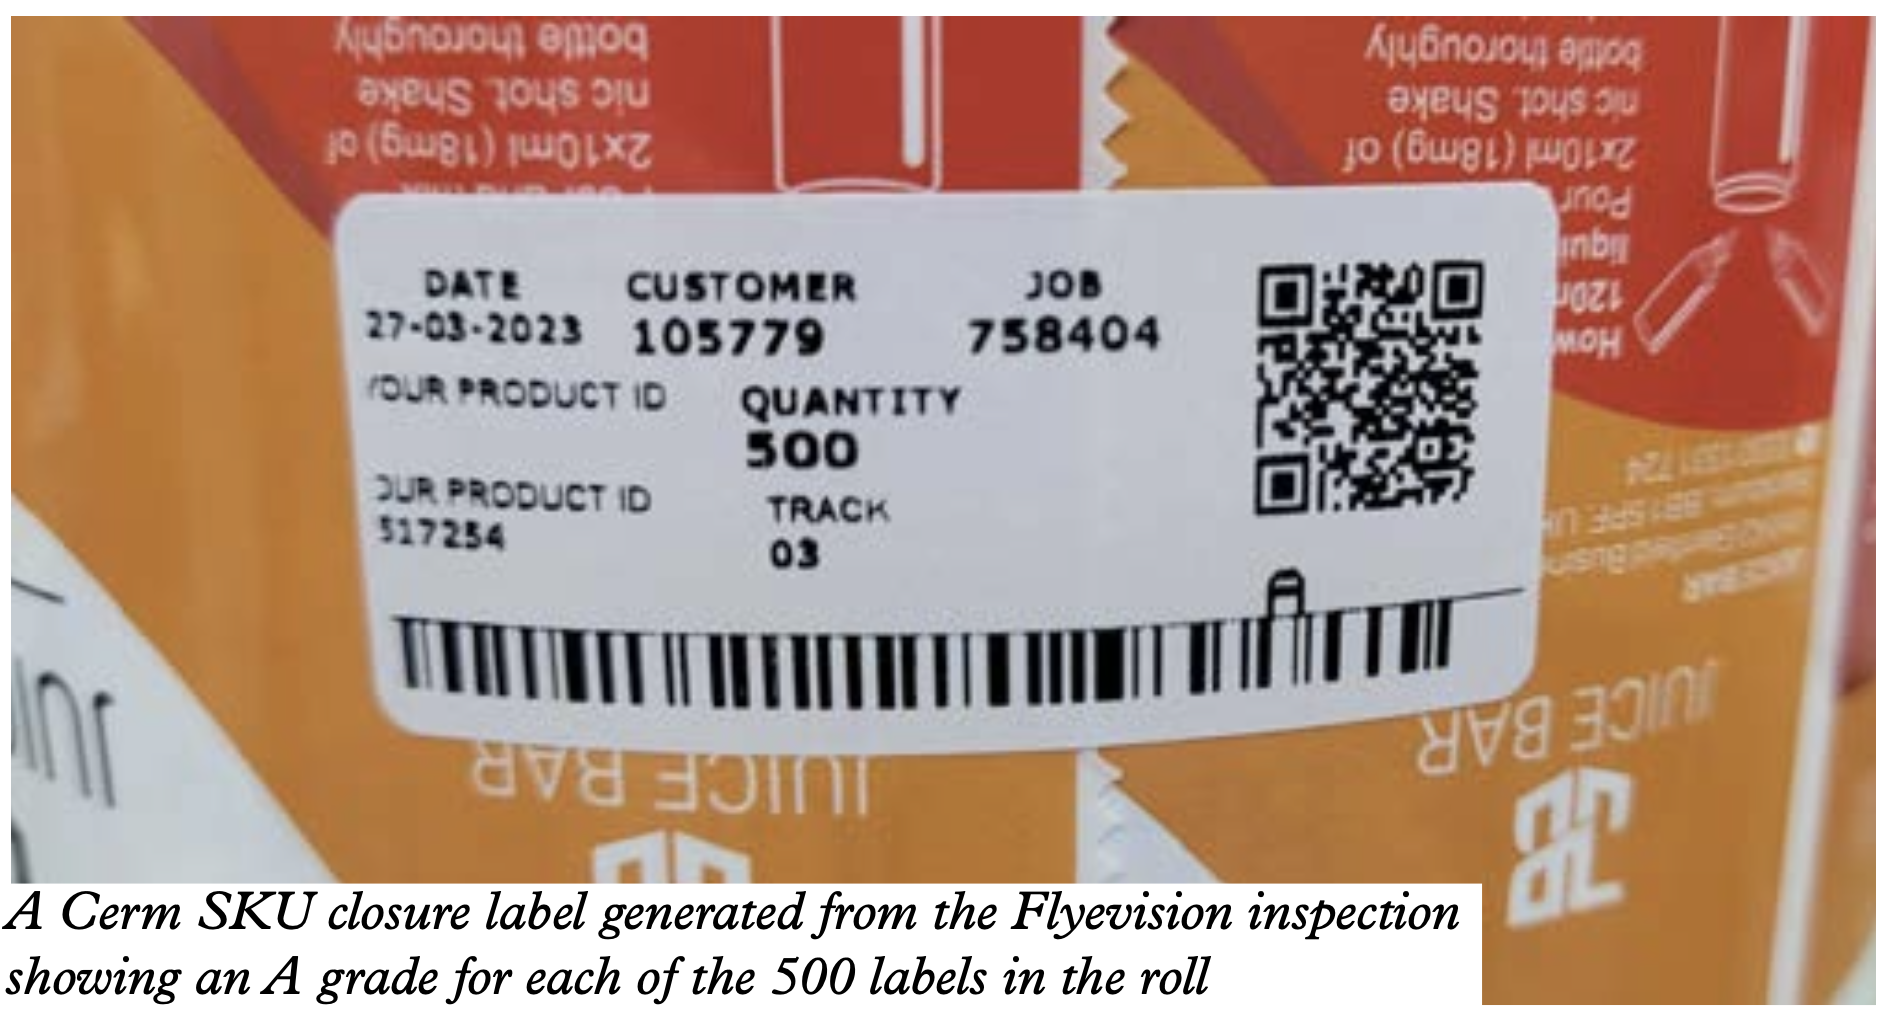 A Cerm SKU closure label generated from the Flyevision inspection showing an A grade for each of the 500 labels in the roll